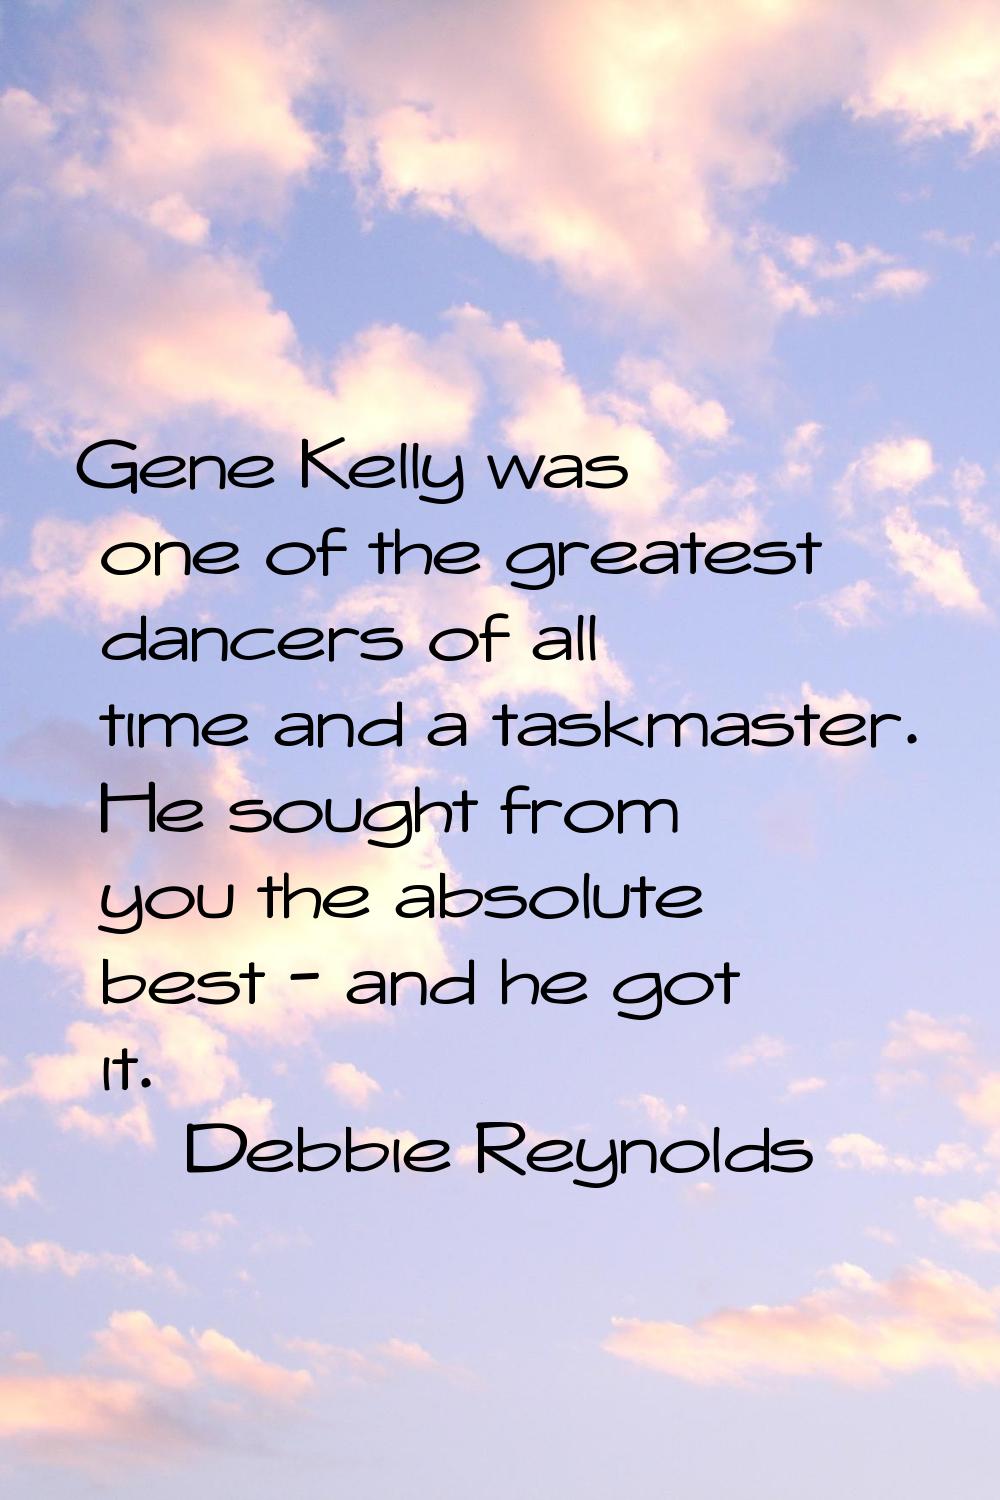 Gene Kelly was one of the greatest dancers of all time and a taskmaster. He sought from you the abs